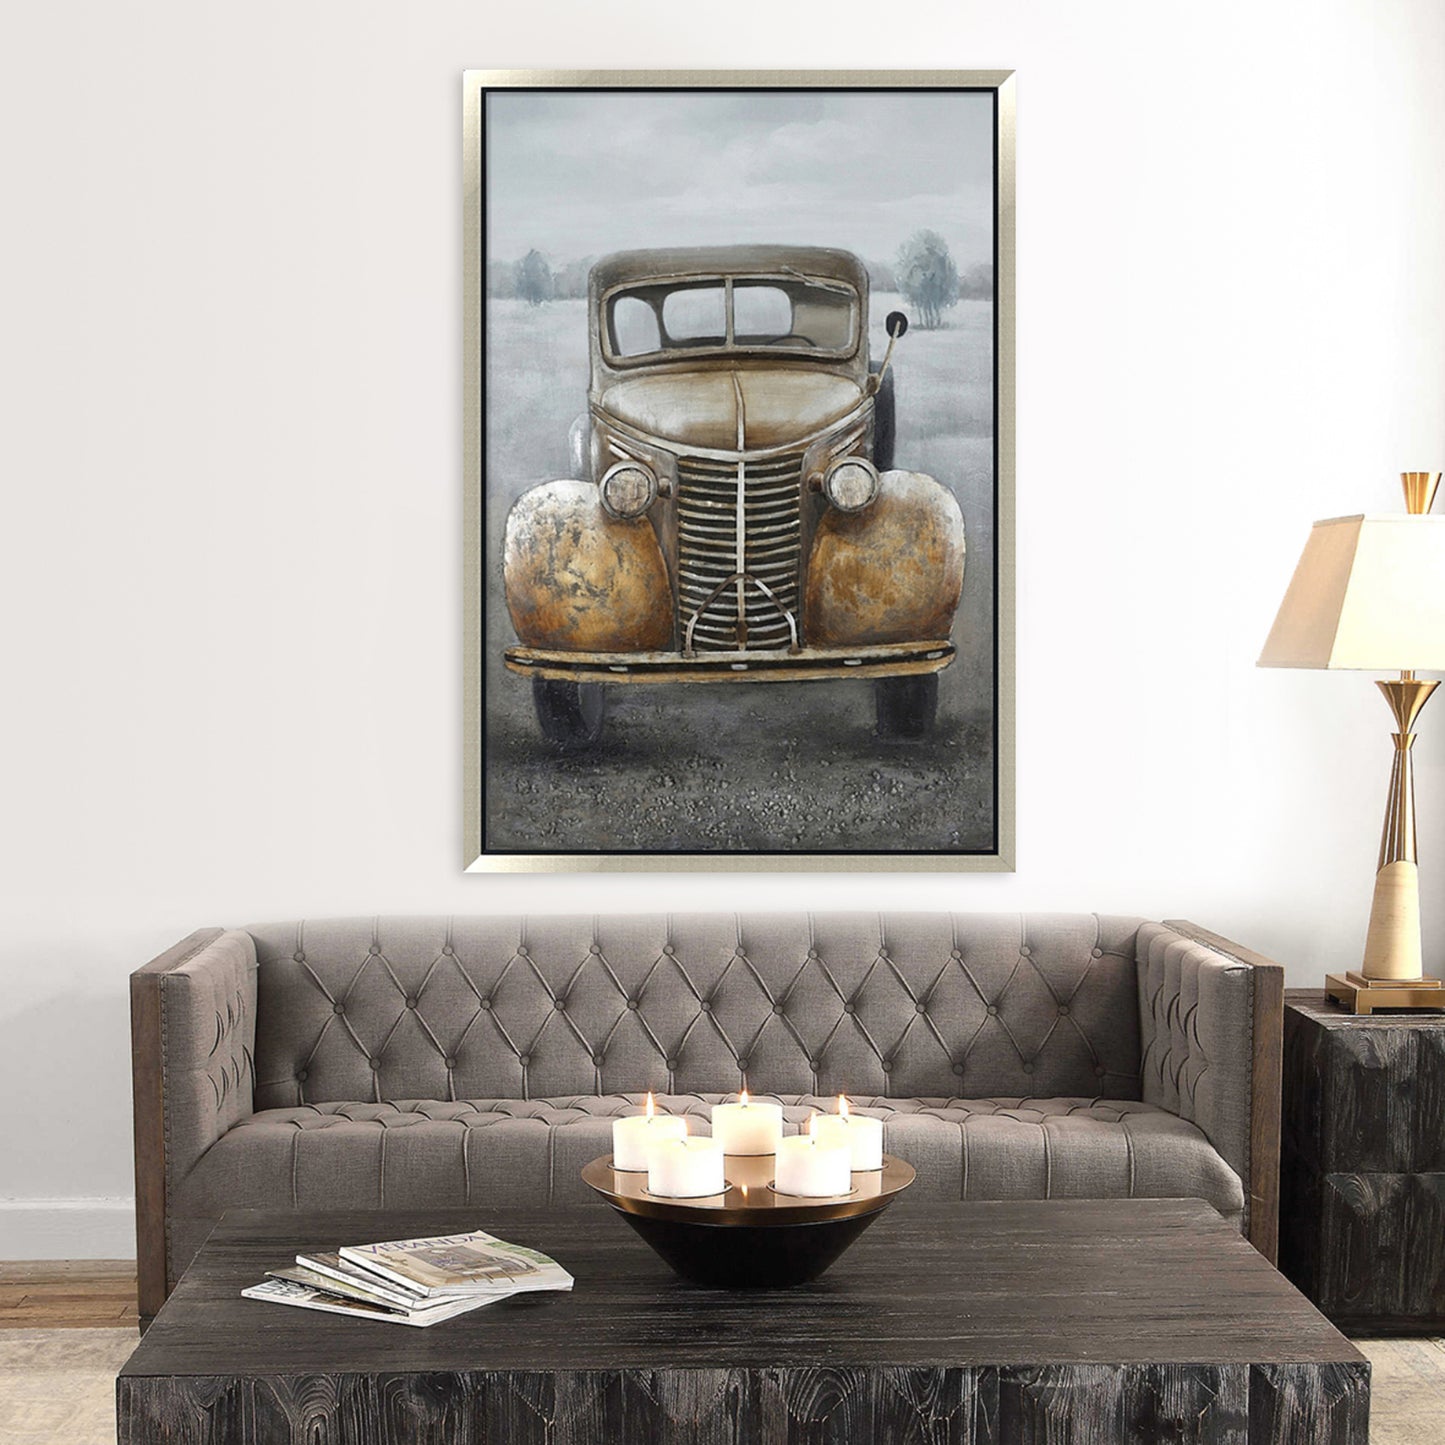 Hand Painted Acrylic and Aluminum 3D Wall Art Vintage Truck 39 x 59 Rectangular Canvas with a Grey Wooden Frame